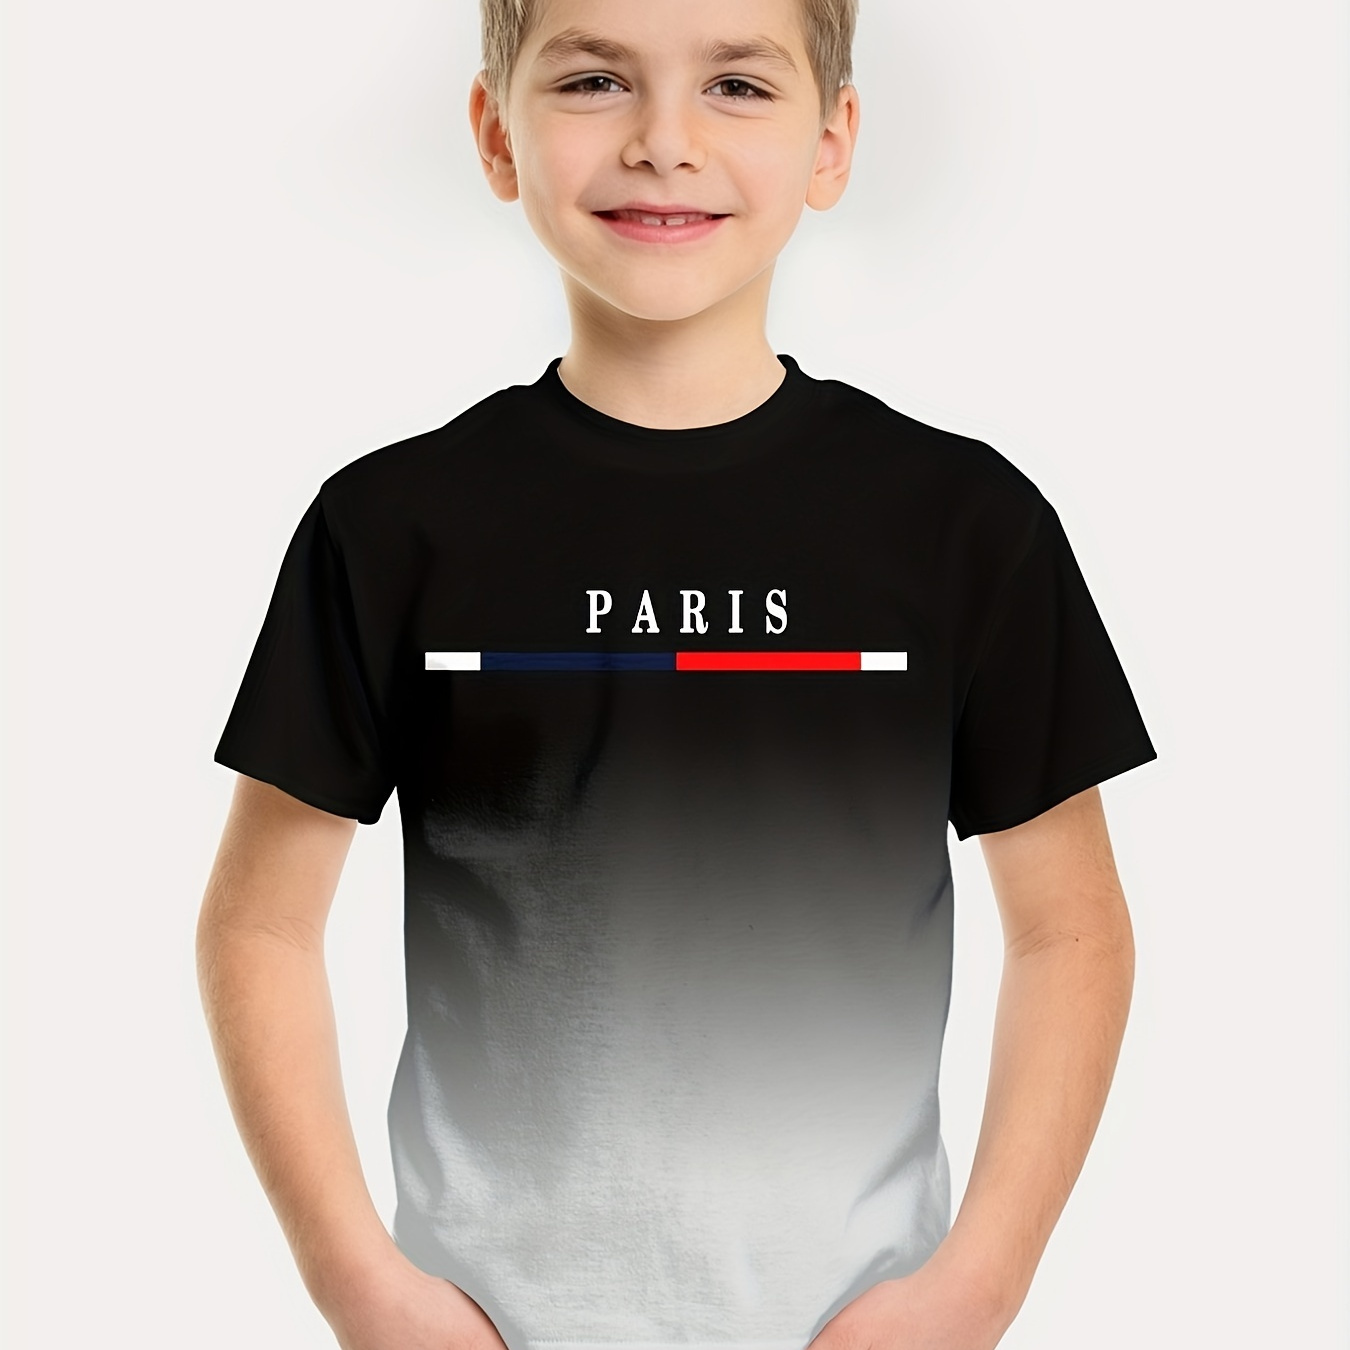 

Paris Letter 3d Print Boys Casual Gradient Short Sleeve T-shirts - Comfortable & Stylish Tops For Summer - Ideal Gift For Your Fashionistas